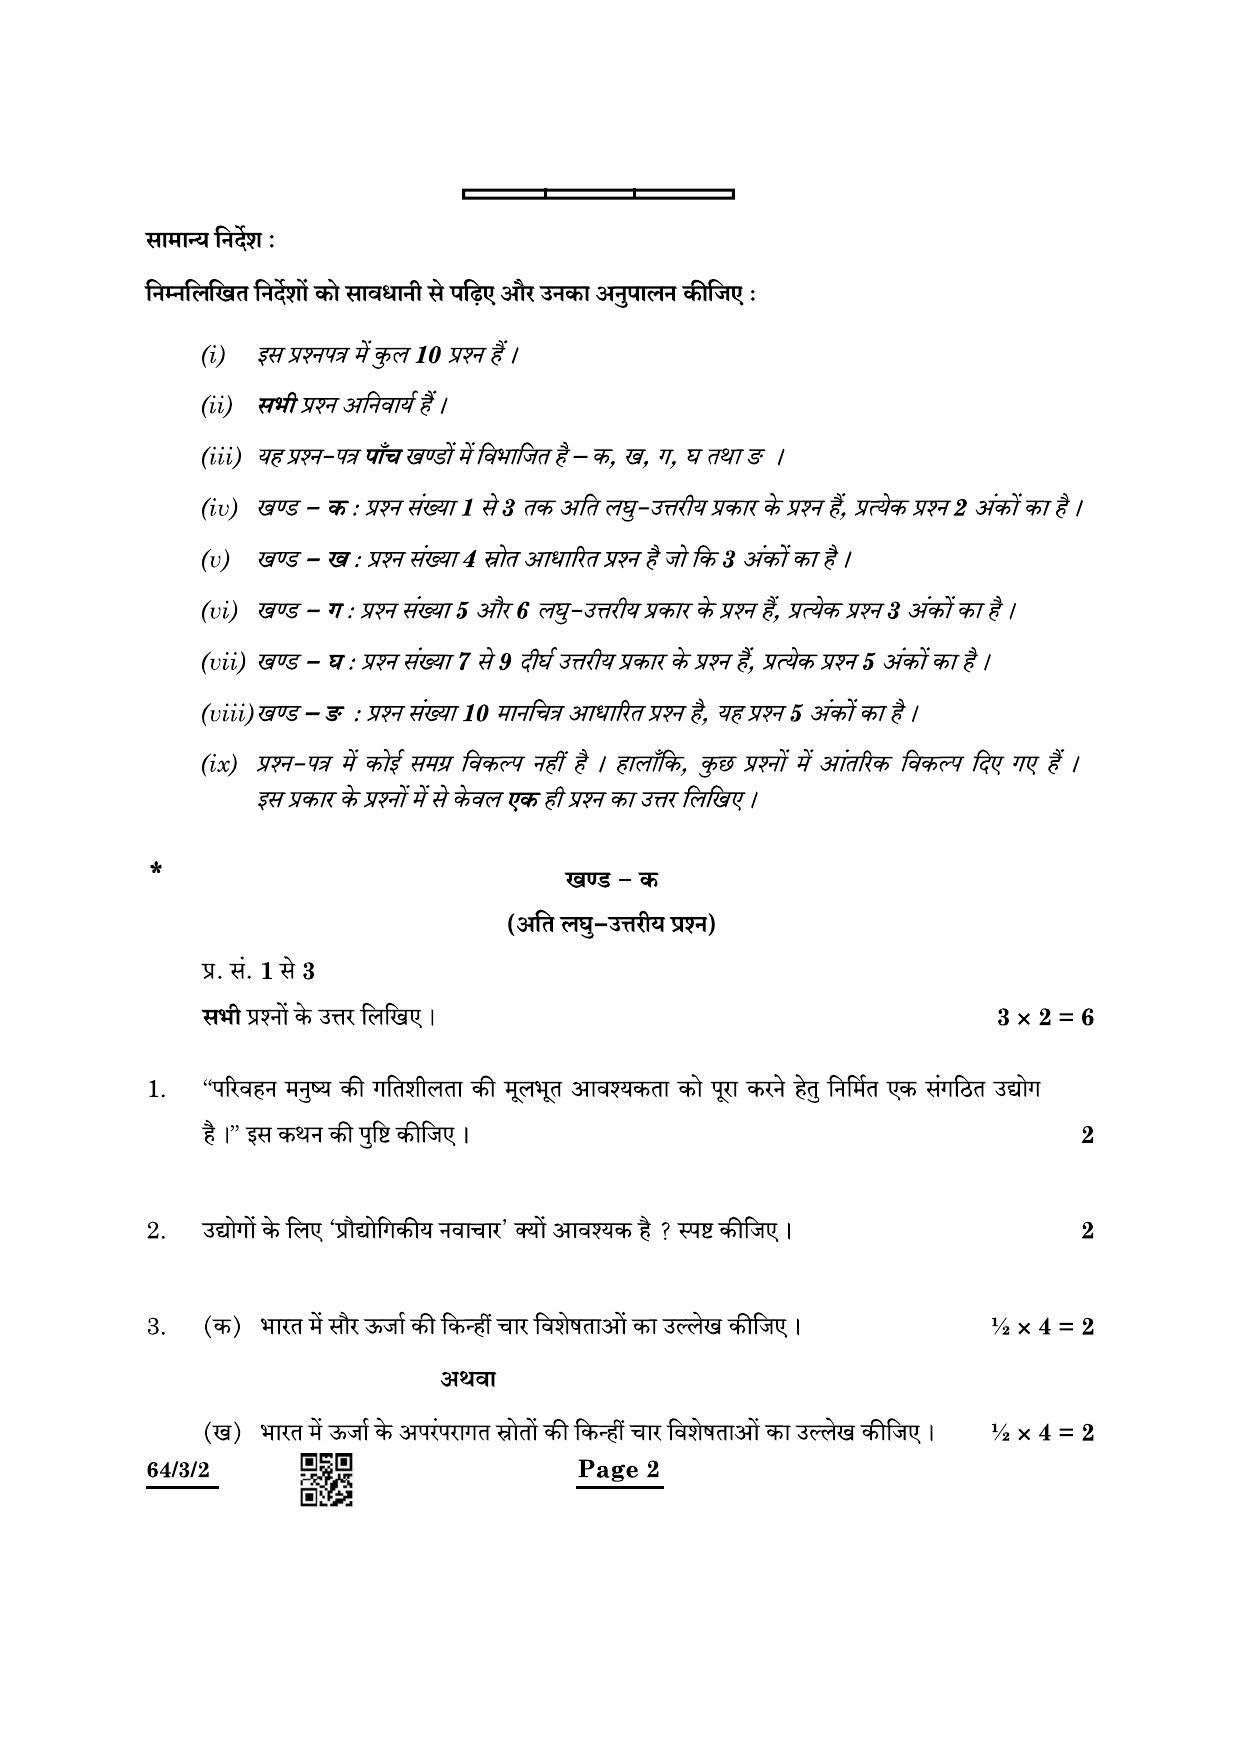 CBSE Class 12 64-3-2 Geography 2022 Question Paper - Page 2